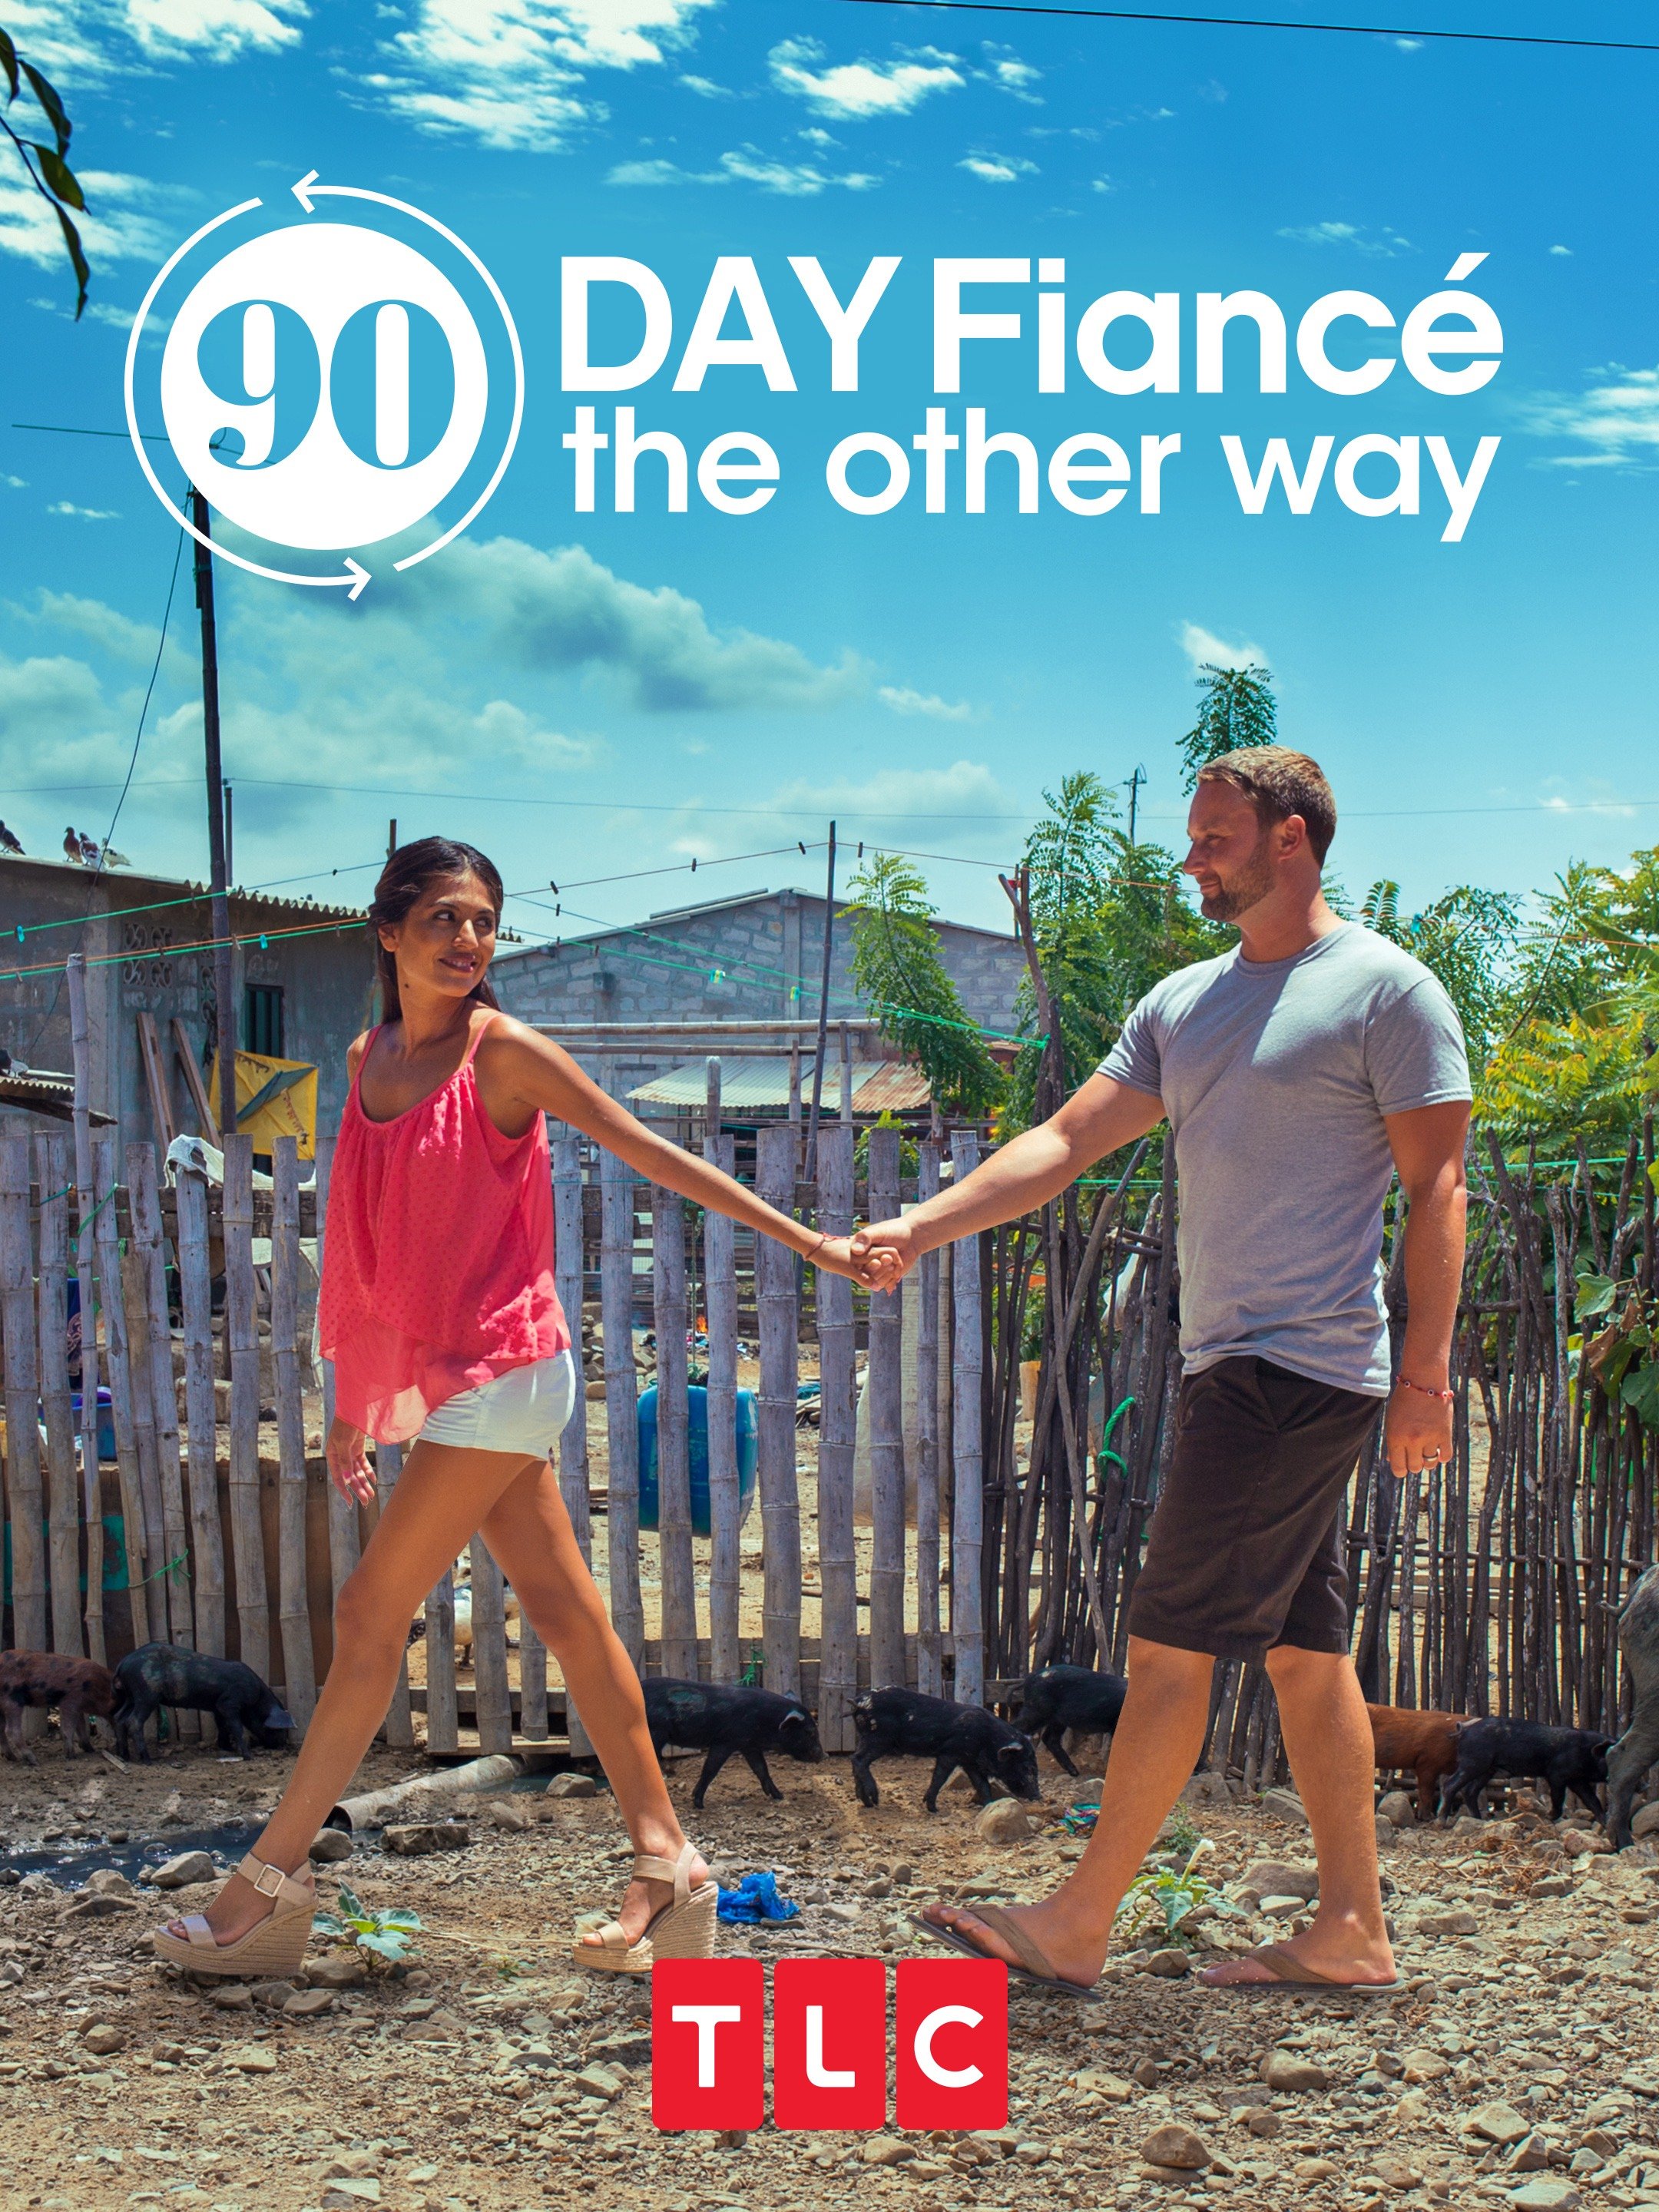 90 Day Fiancé The Other Way Rotten Tomatoes 